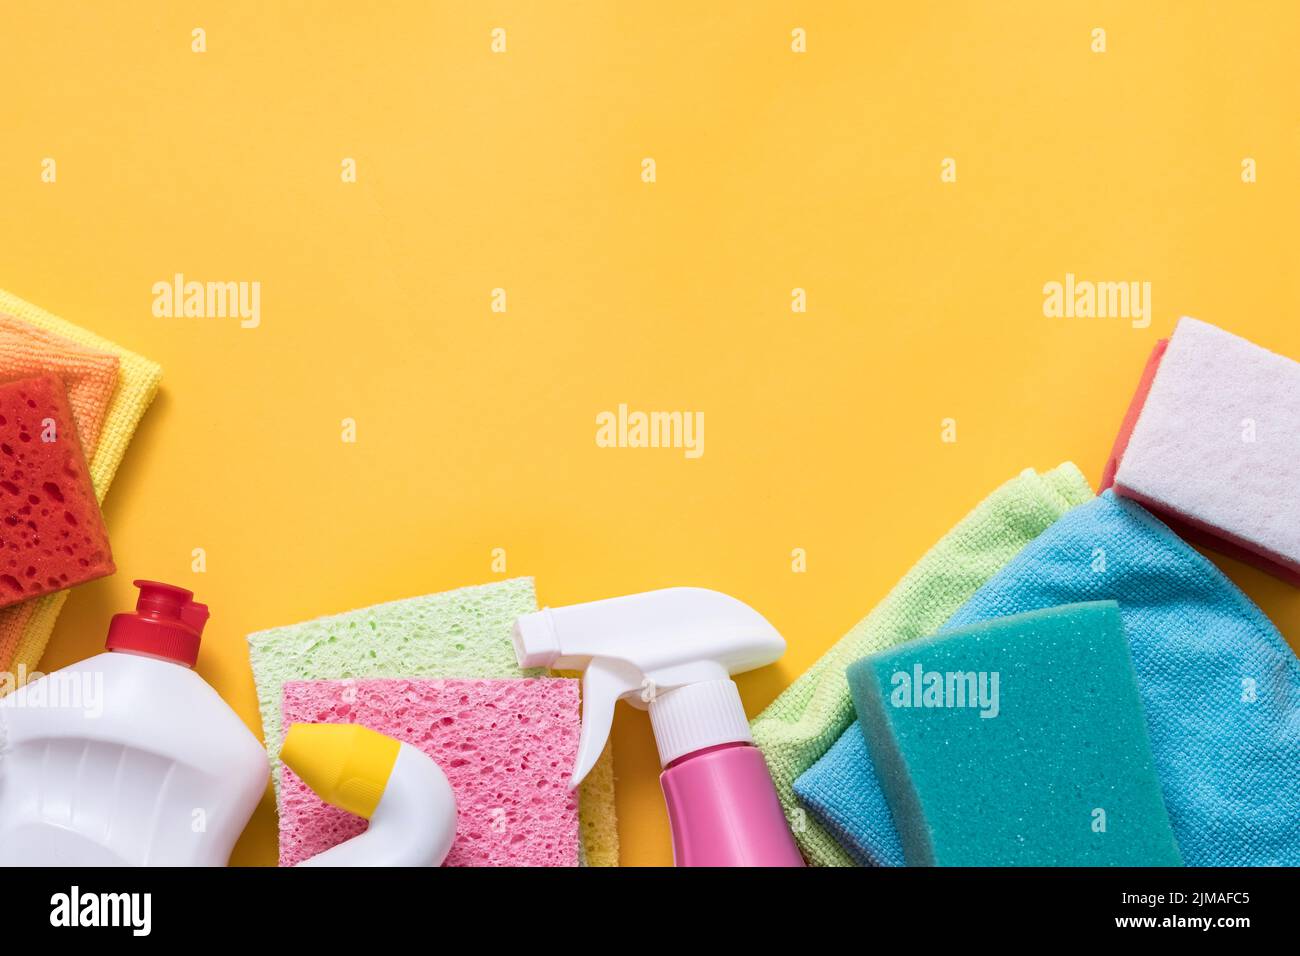 housekeeping cleaning supplies assortment Stock Photo